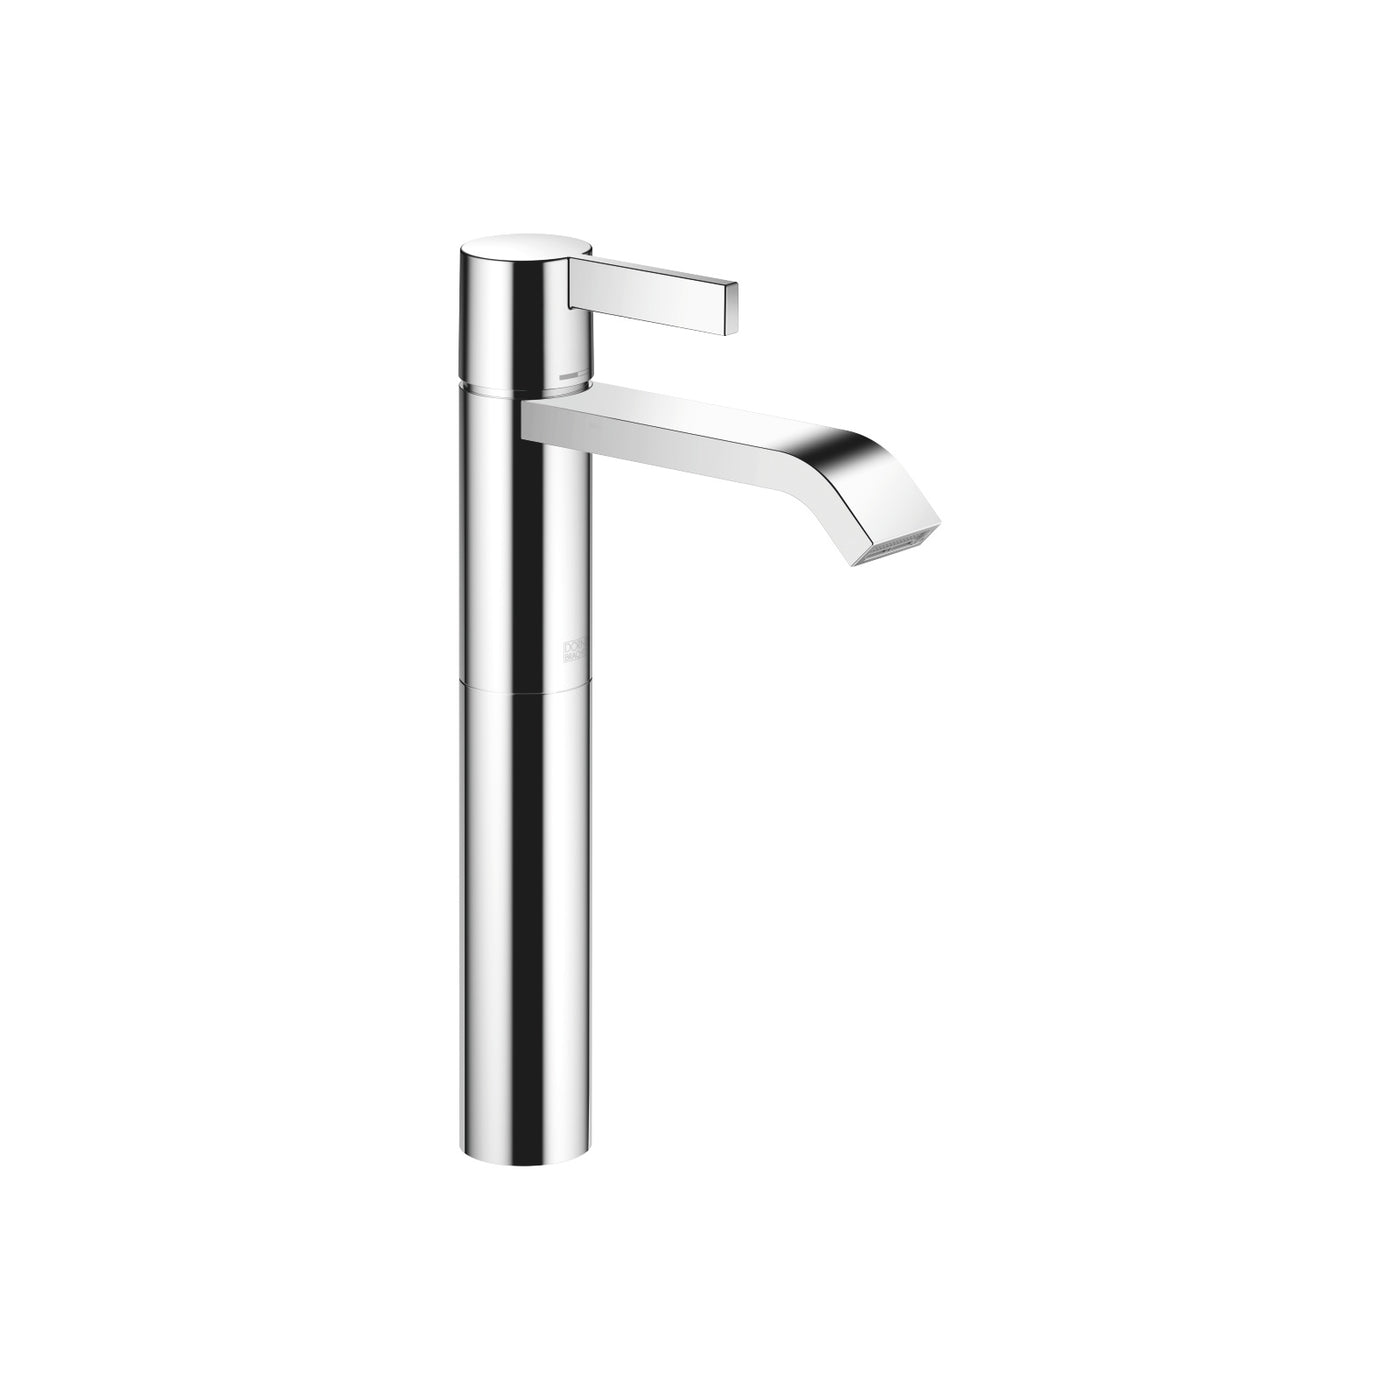 Single-lever basin mixer with raised base without pop-up waste